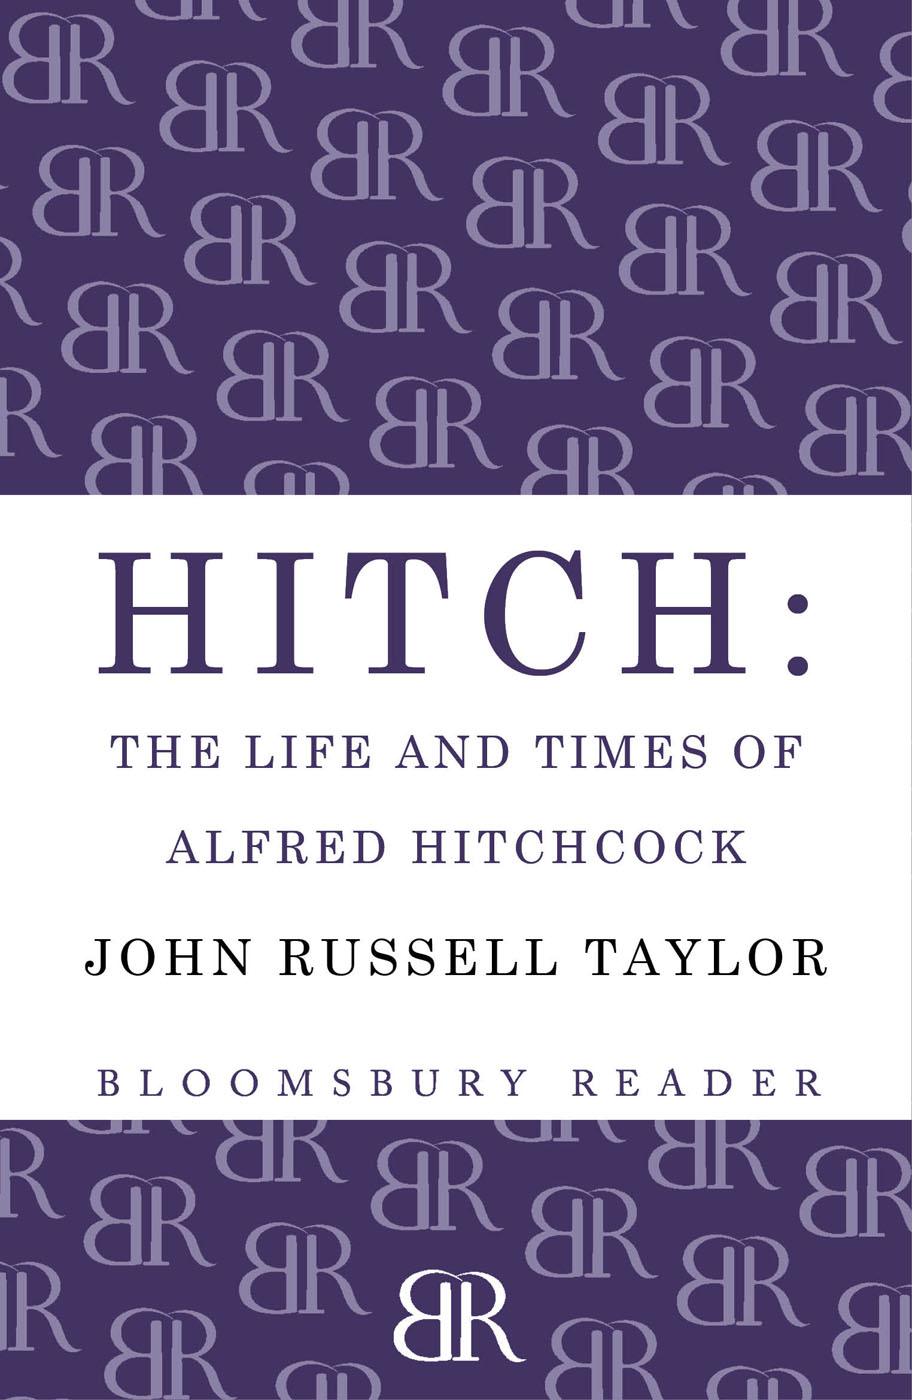 Hitch (2013) by John Russell Taylor